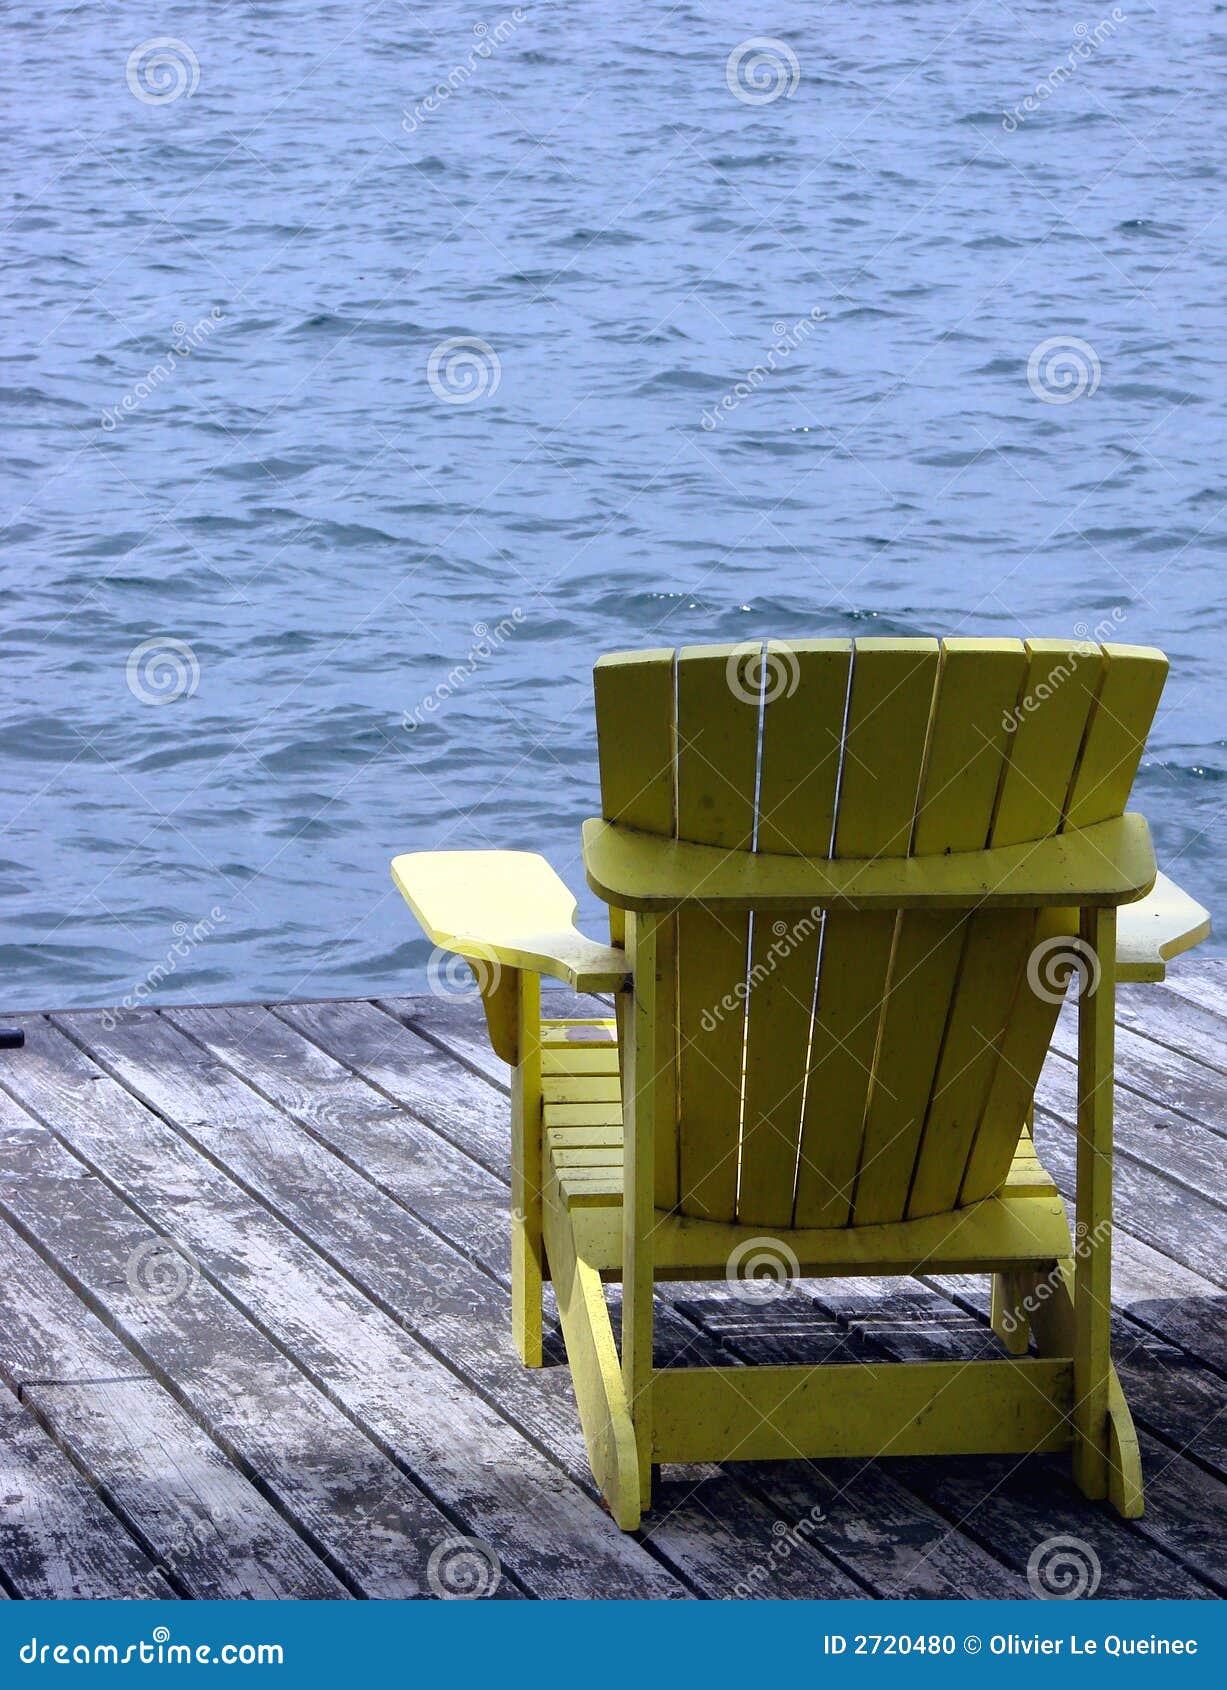 Yellow Wood Adirondack Chair On A Dock Over Water Stock Photo - Image ...